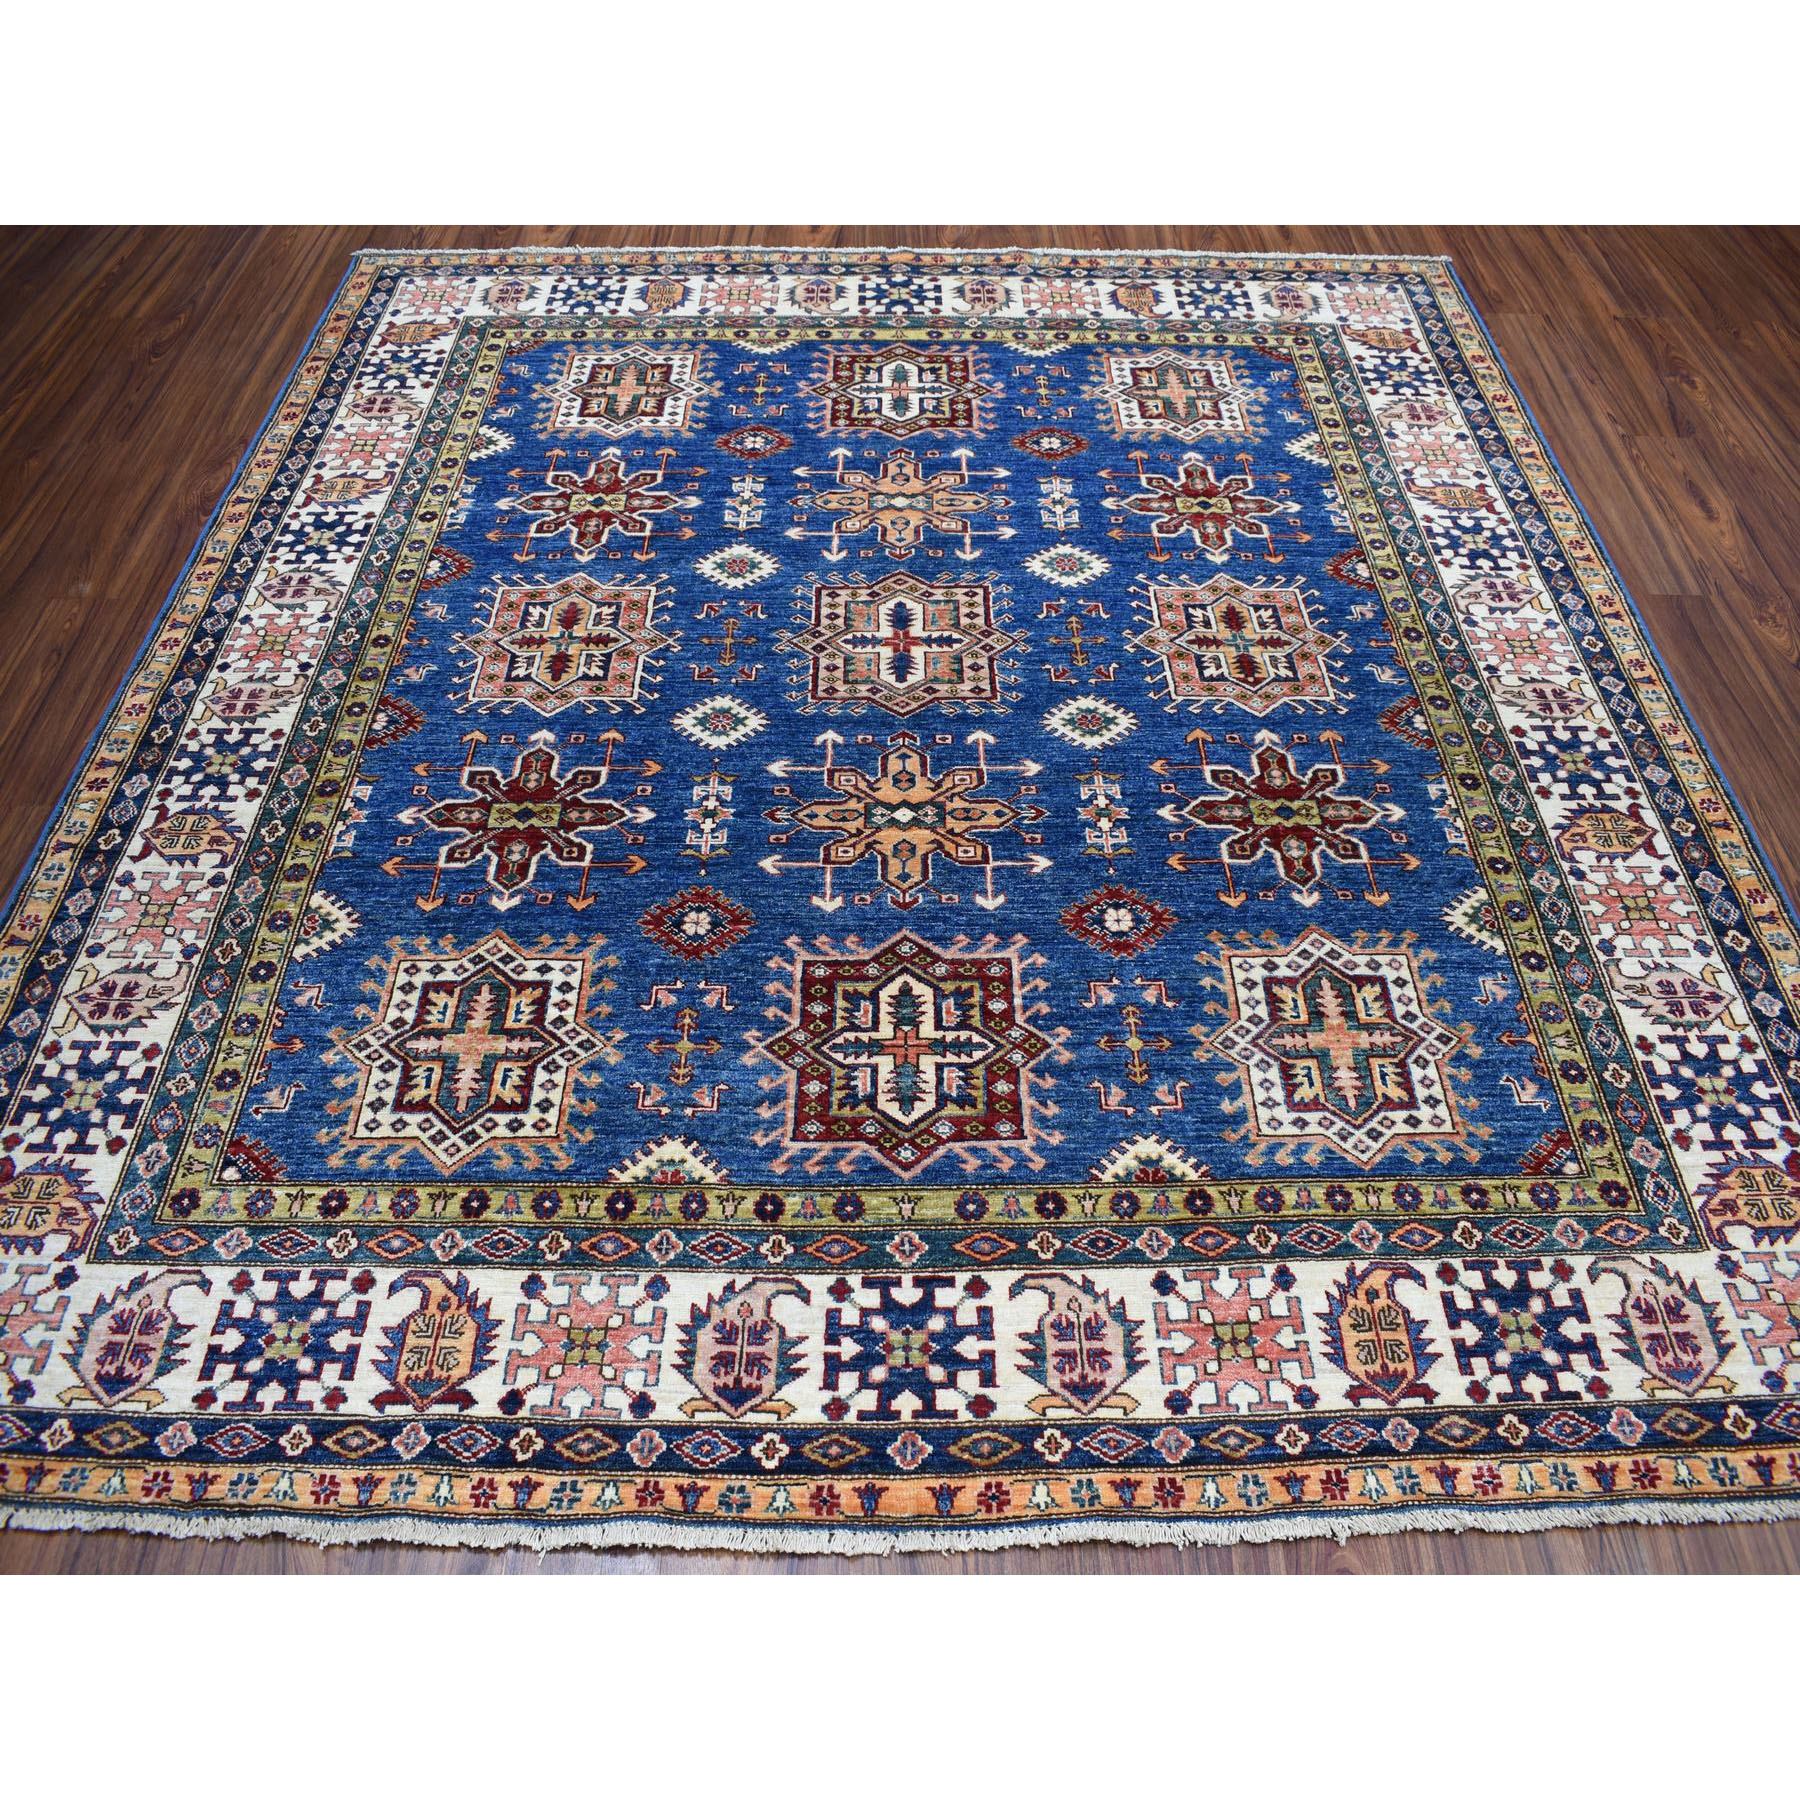 8-3 x8-3  Square Blue Super Kazak Pure Wool Hand Knotted Tribal Design Rug 